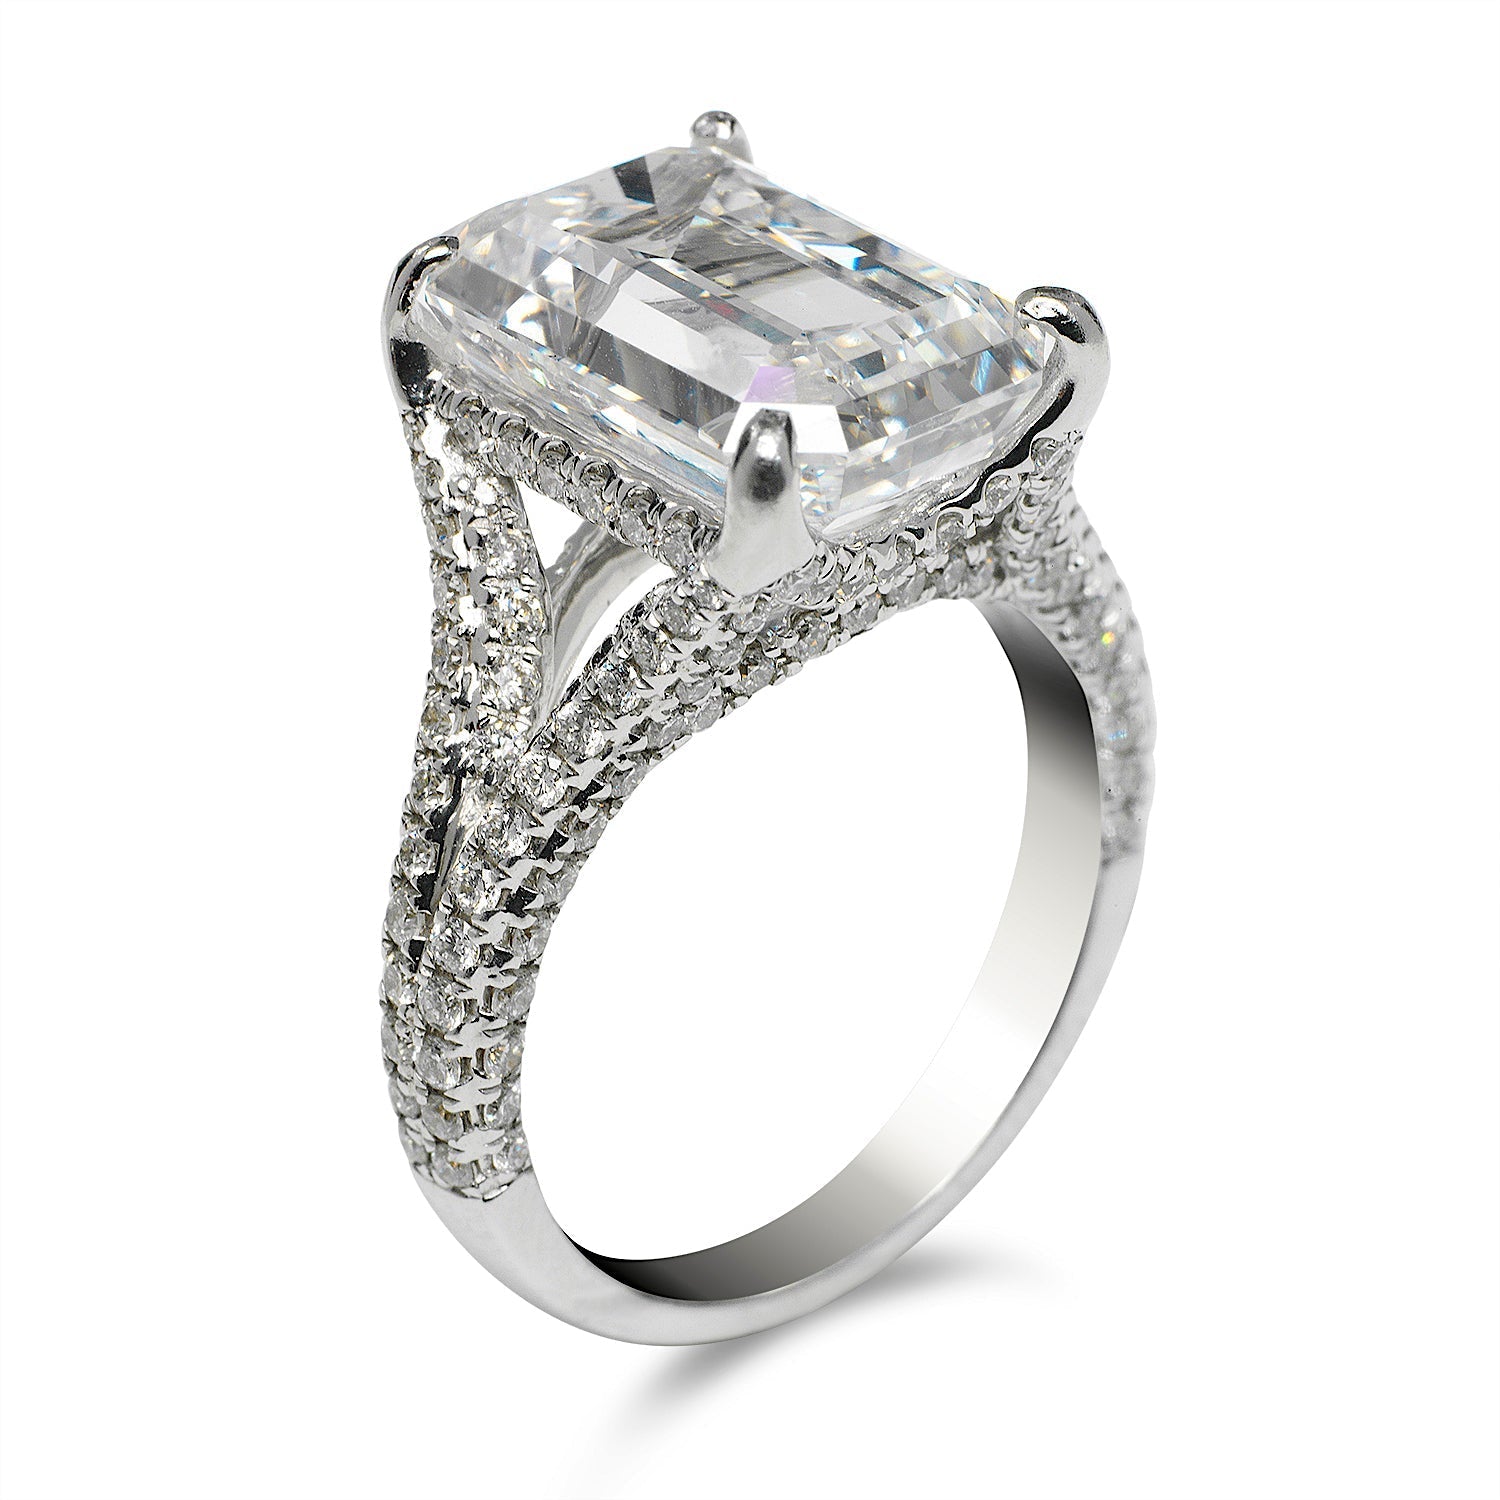 Diamond Ring Emerald Cut 8 Carat Solitaire Ring in 18k White Gold Side View